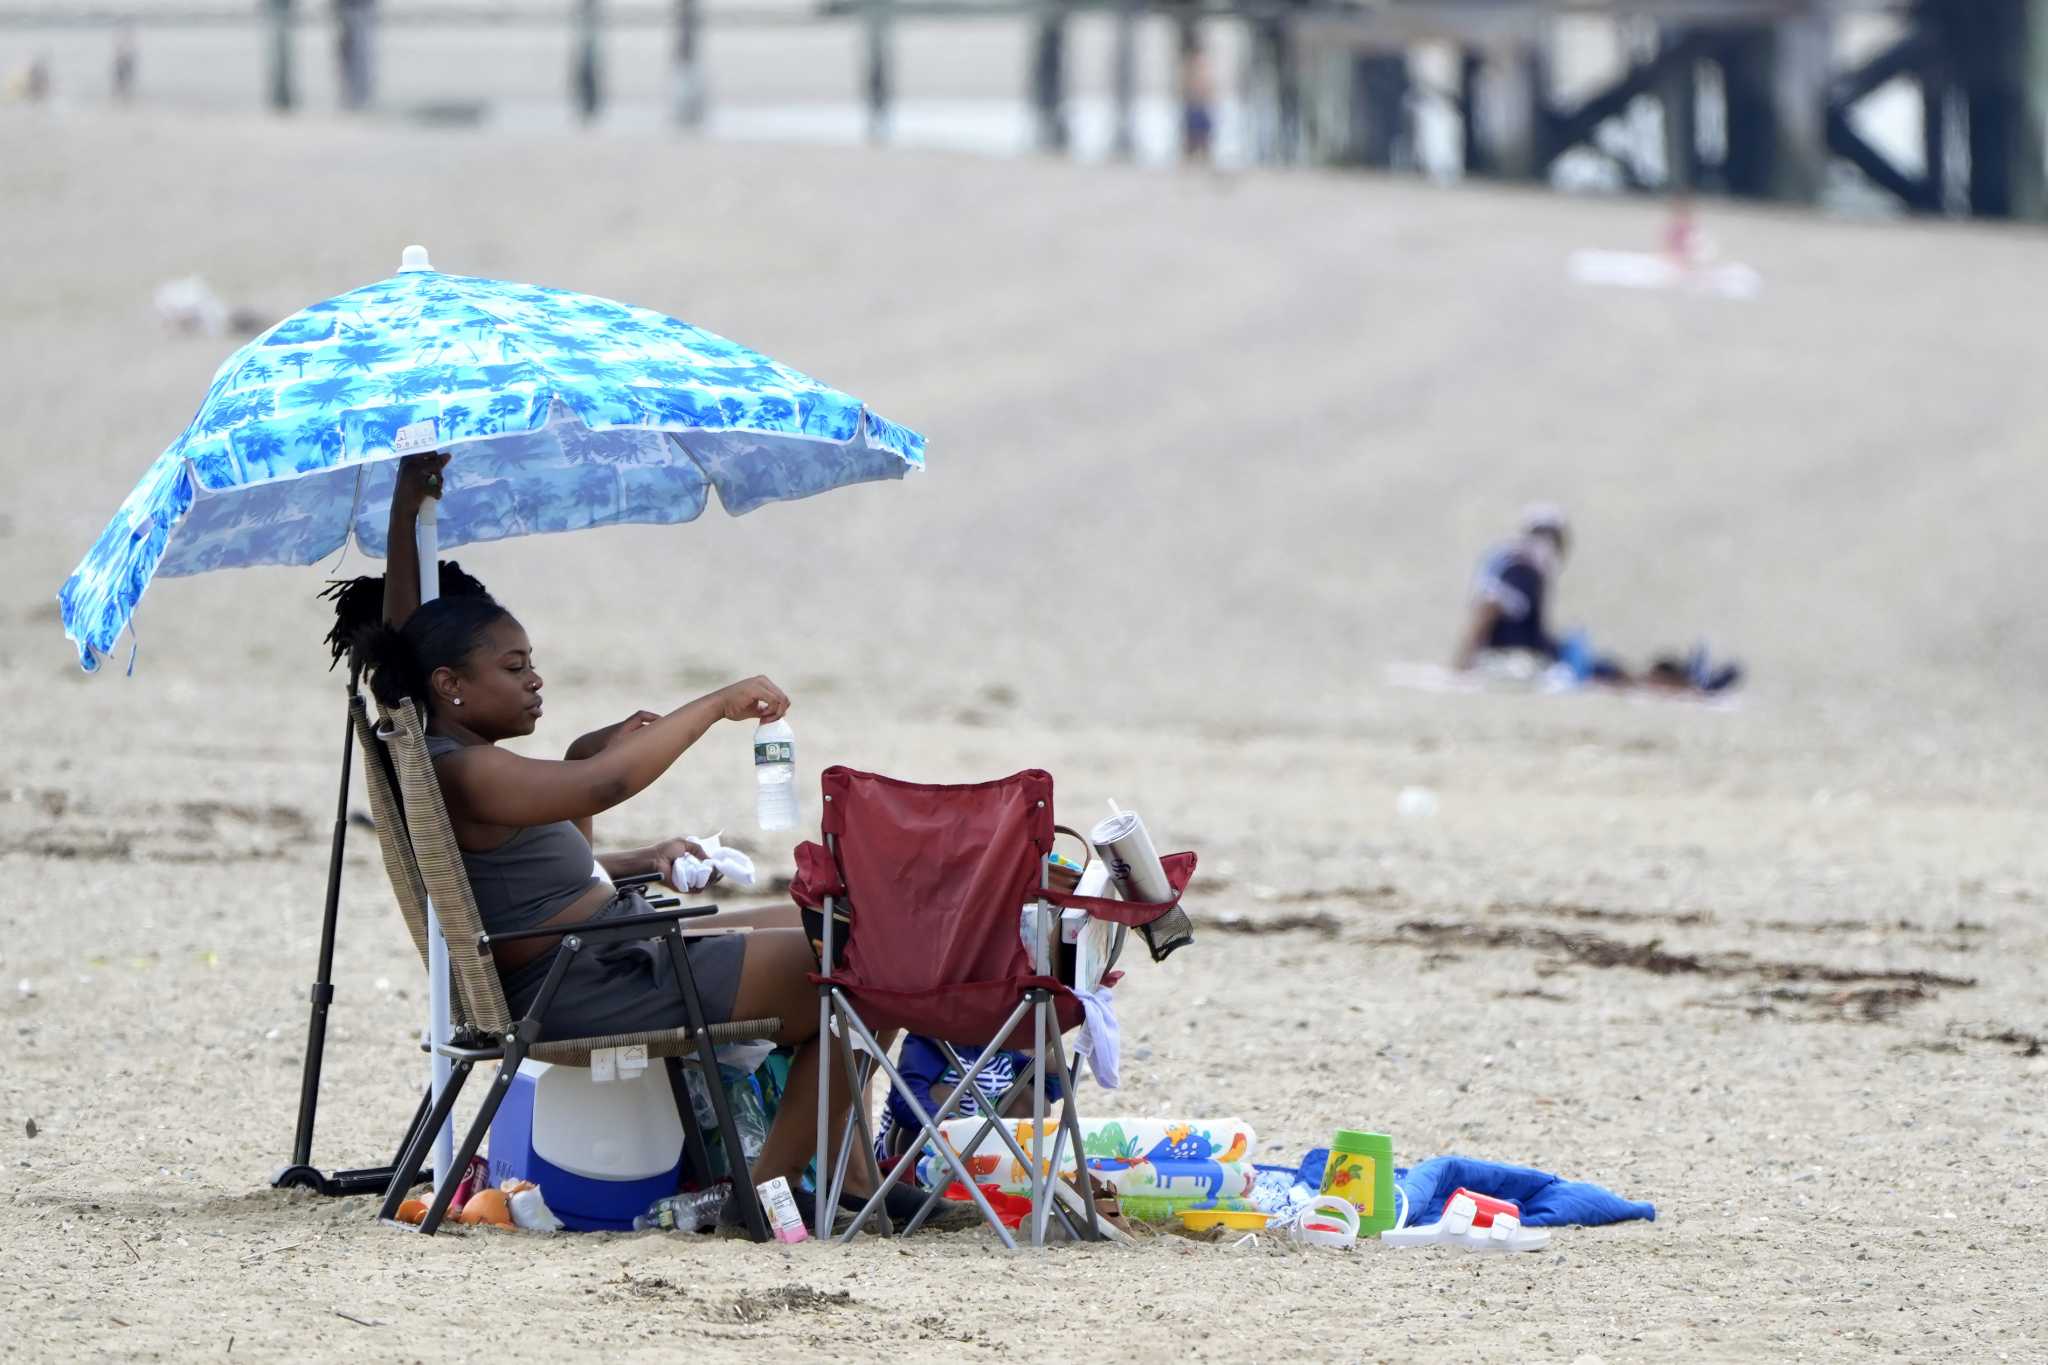 Last summer Boston was afflicted by rain. This year, there's a heat emergency